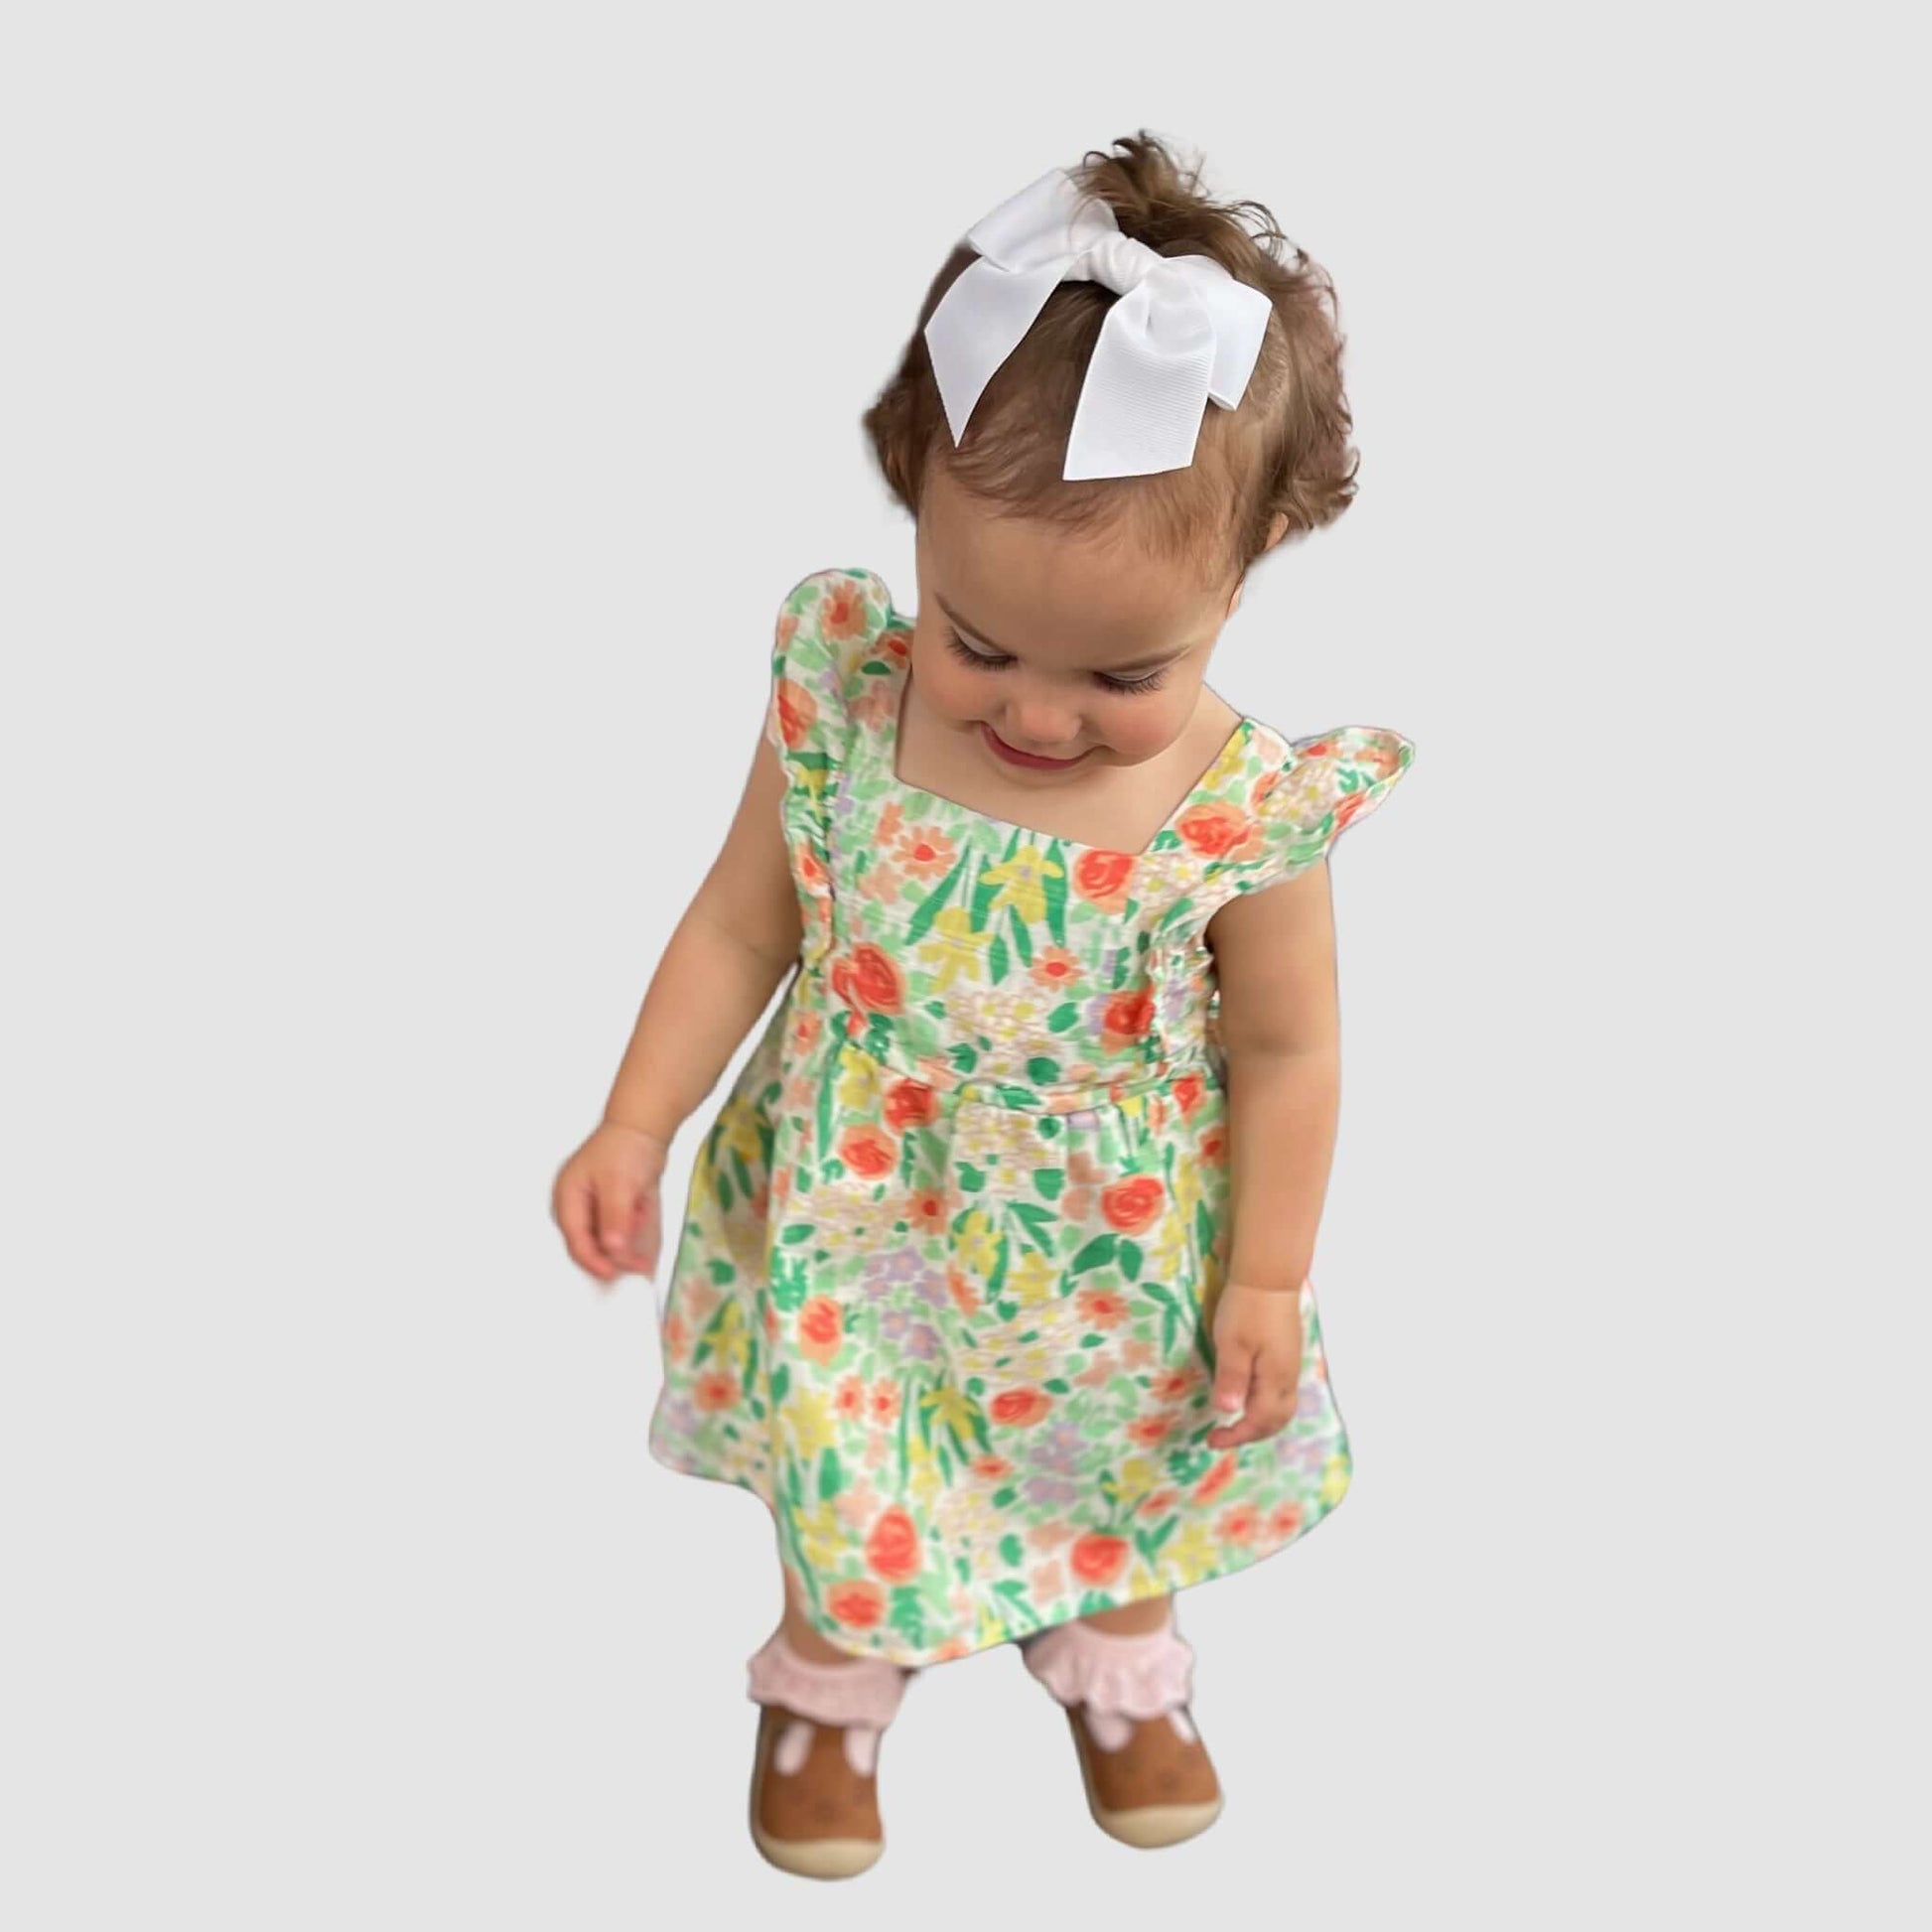 Toddler wearing a floral dress with a white grosgrain sailor bow in her hair